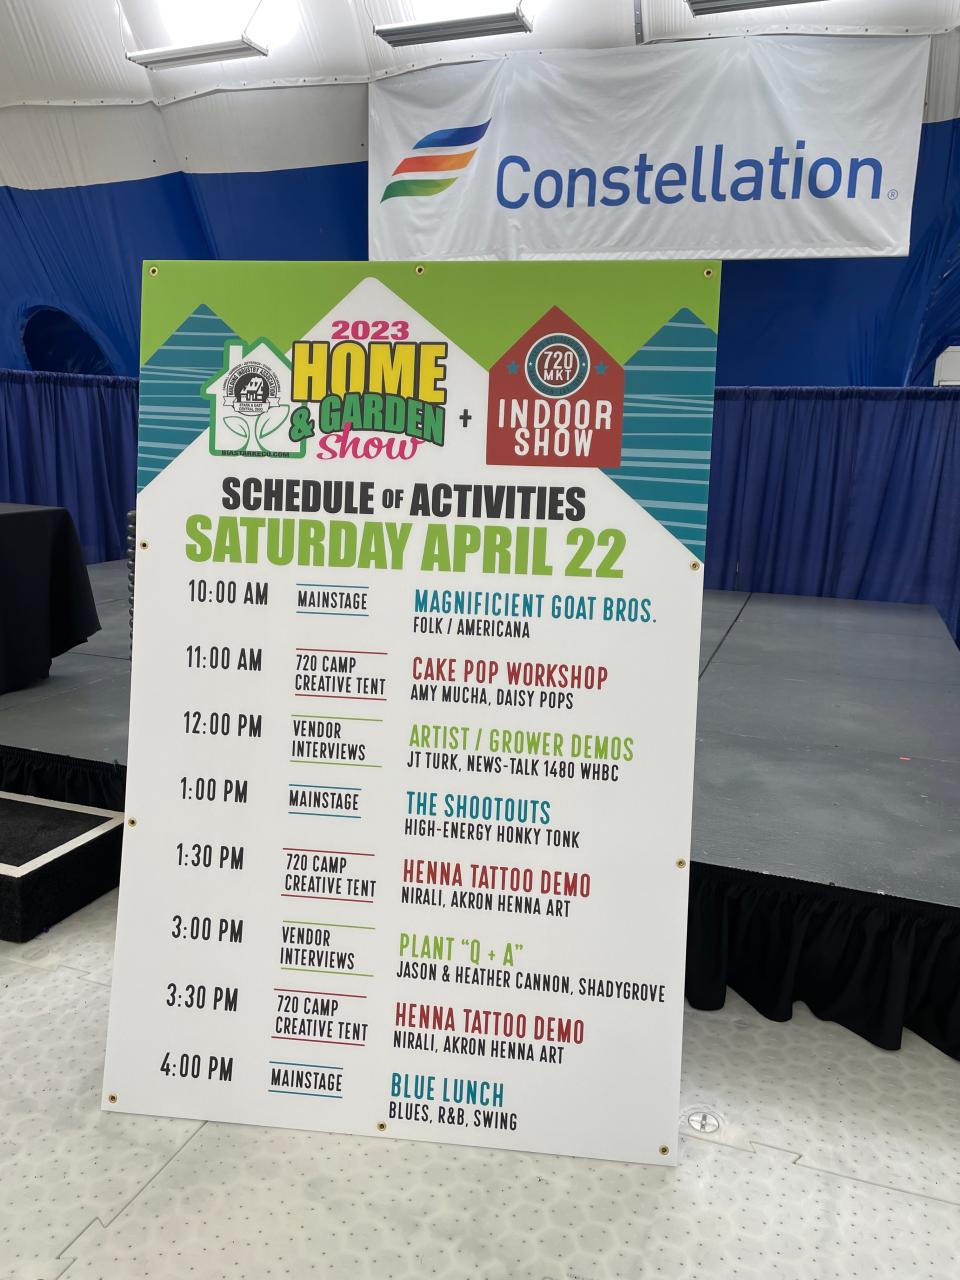 The 2023 Home & Garden Show also will feature The 720 Market with vendors, entertainment and activities.